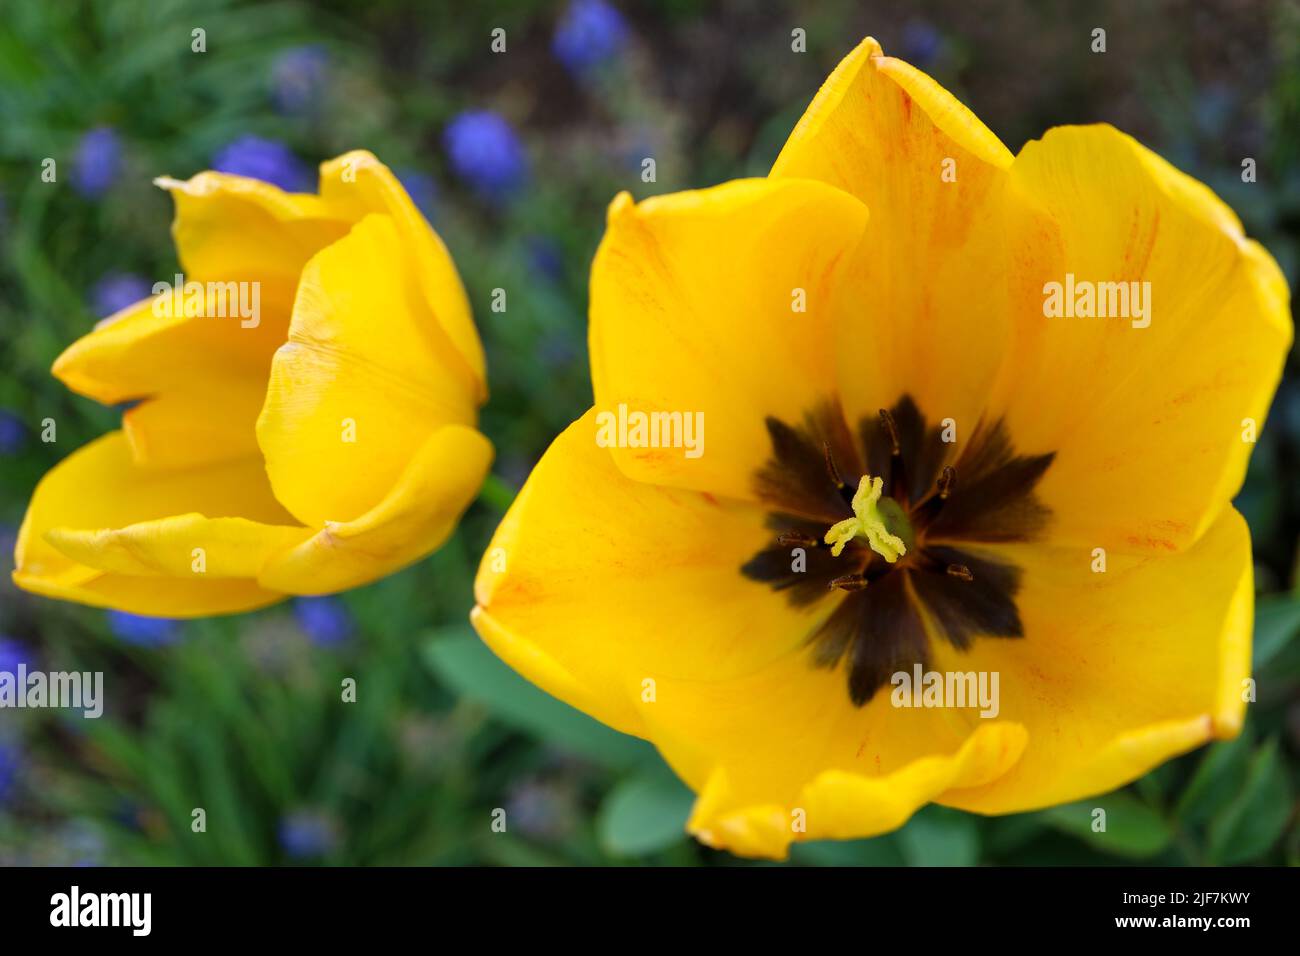 Yellow tulips with delicate petals and dark stamens, tulips with green leaves in the garden, spring flowers macro , beauty in nature, flower head, Stock Photo